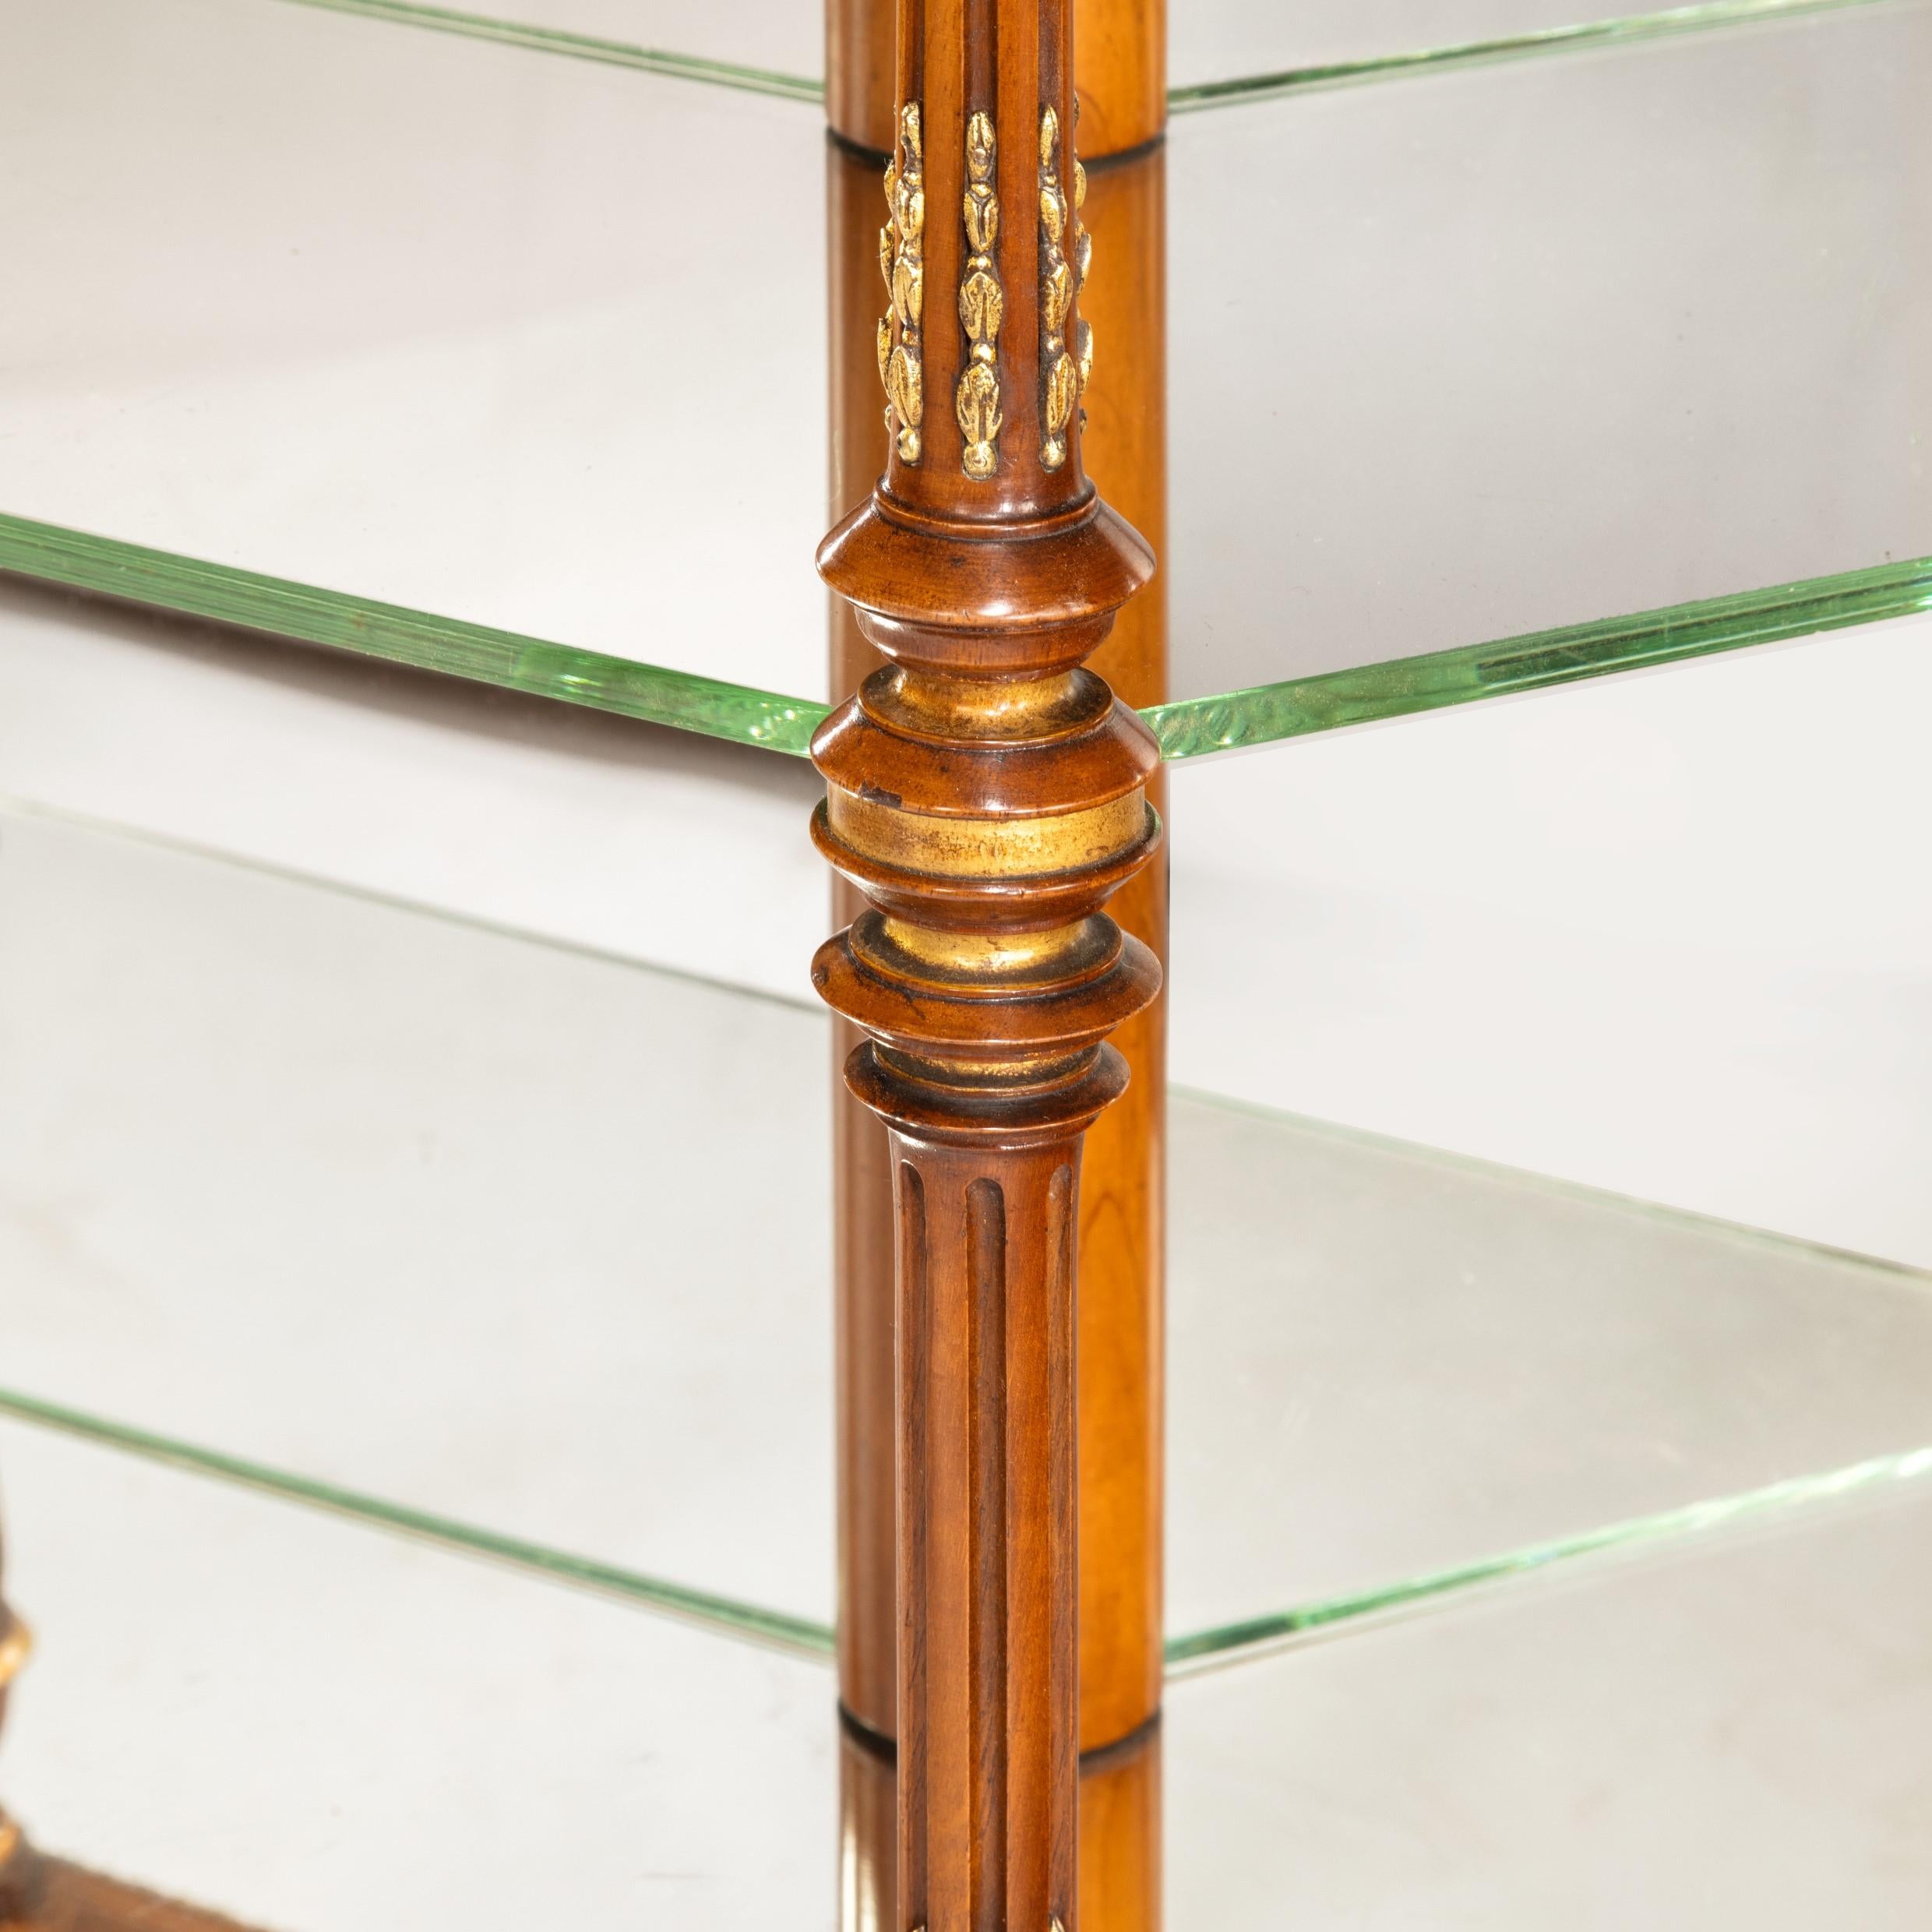 A rare hexagonal walnut display table attributed to Holland and Sons, of the finest quality with the original mirror-inset top and mirror-backed glass shelves, each corner with a turned parcel gilt solid walnut stop-fluted column, decorated with